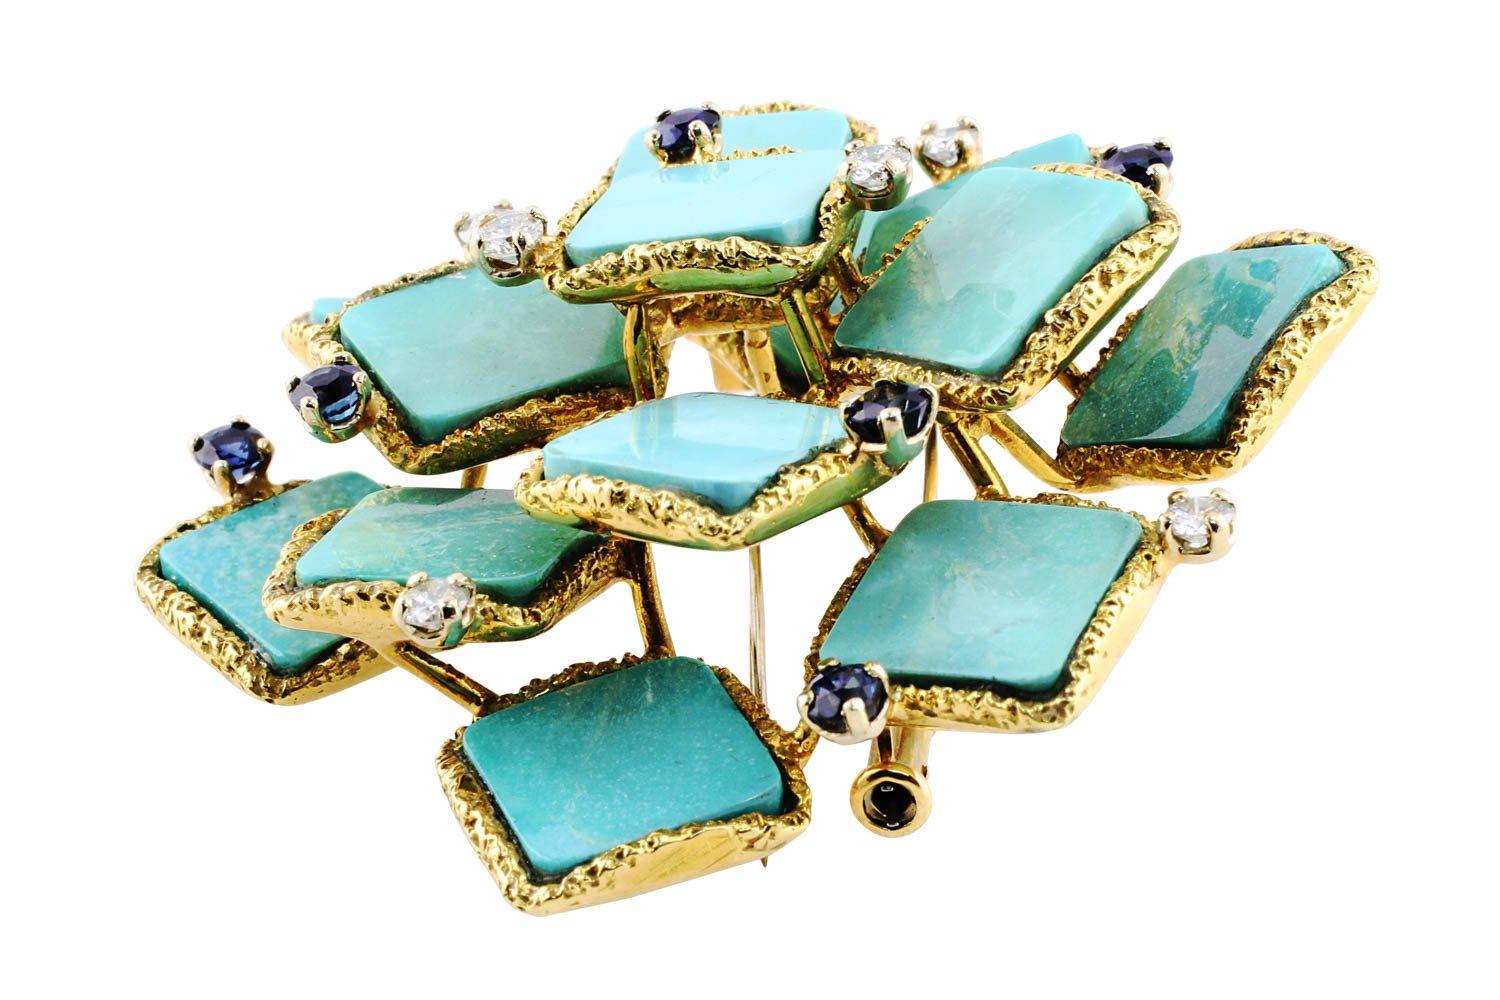 Estate Turquoise Brooch. 18k yellow gold French Hallmark estate brooch set with turquoise with diamond and sapphire accents. The 6 diamonds weigh approximately 0.50cttw and the 6 sapphires weigh approximately 0.78cttw.